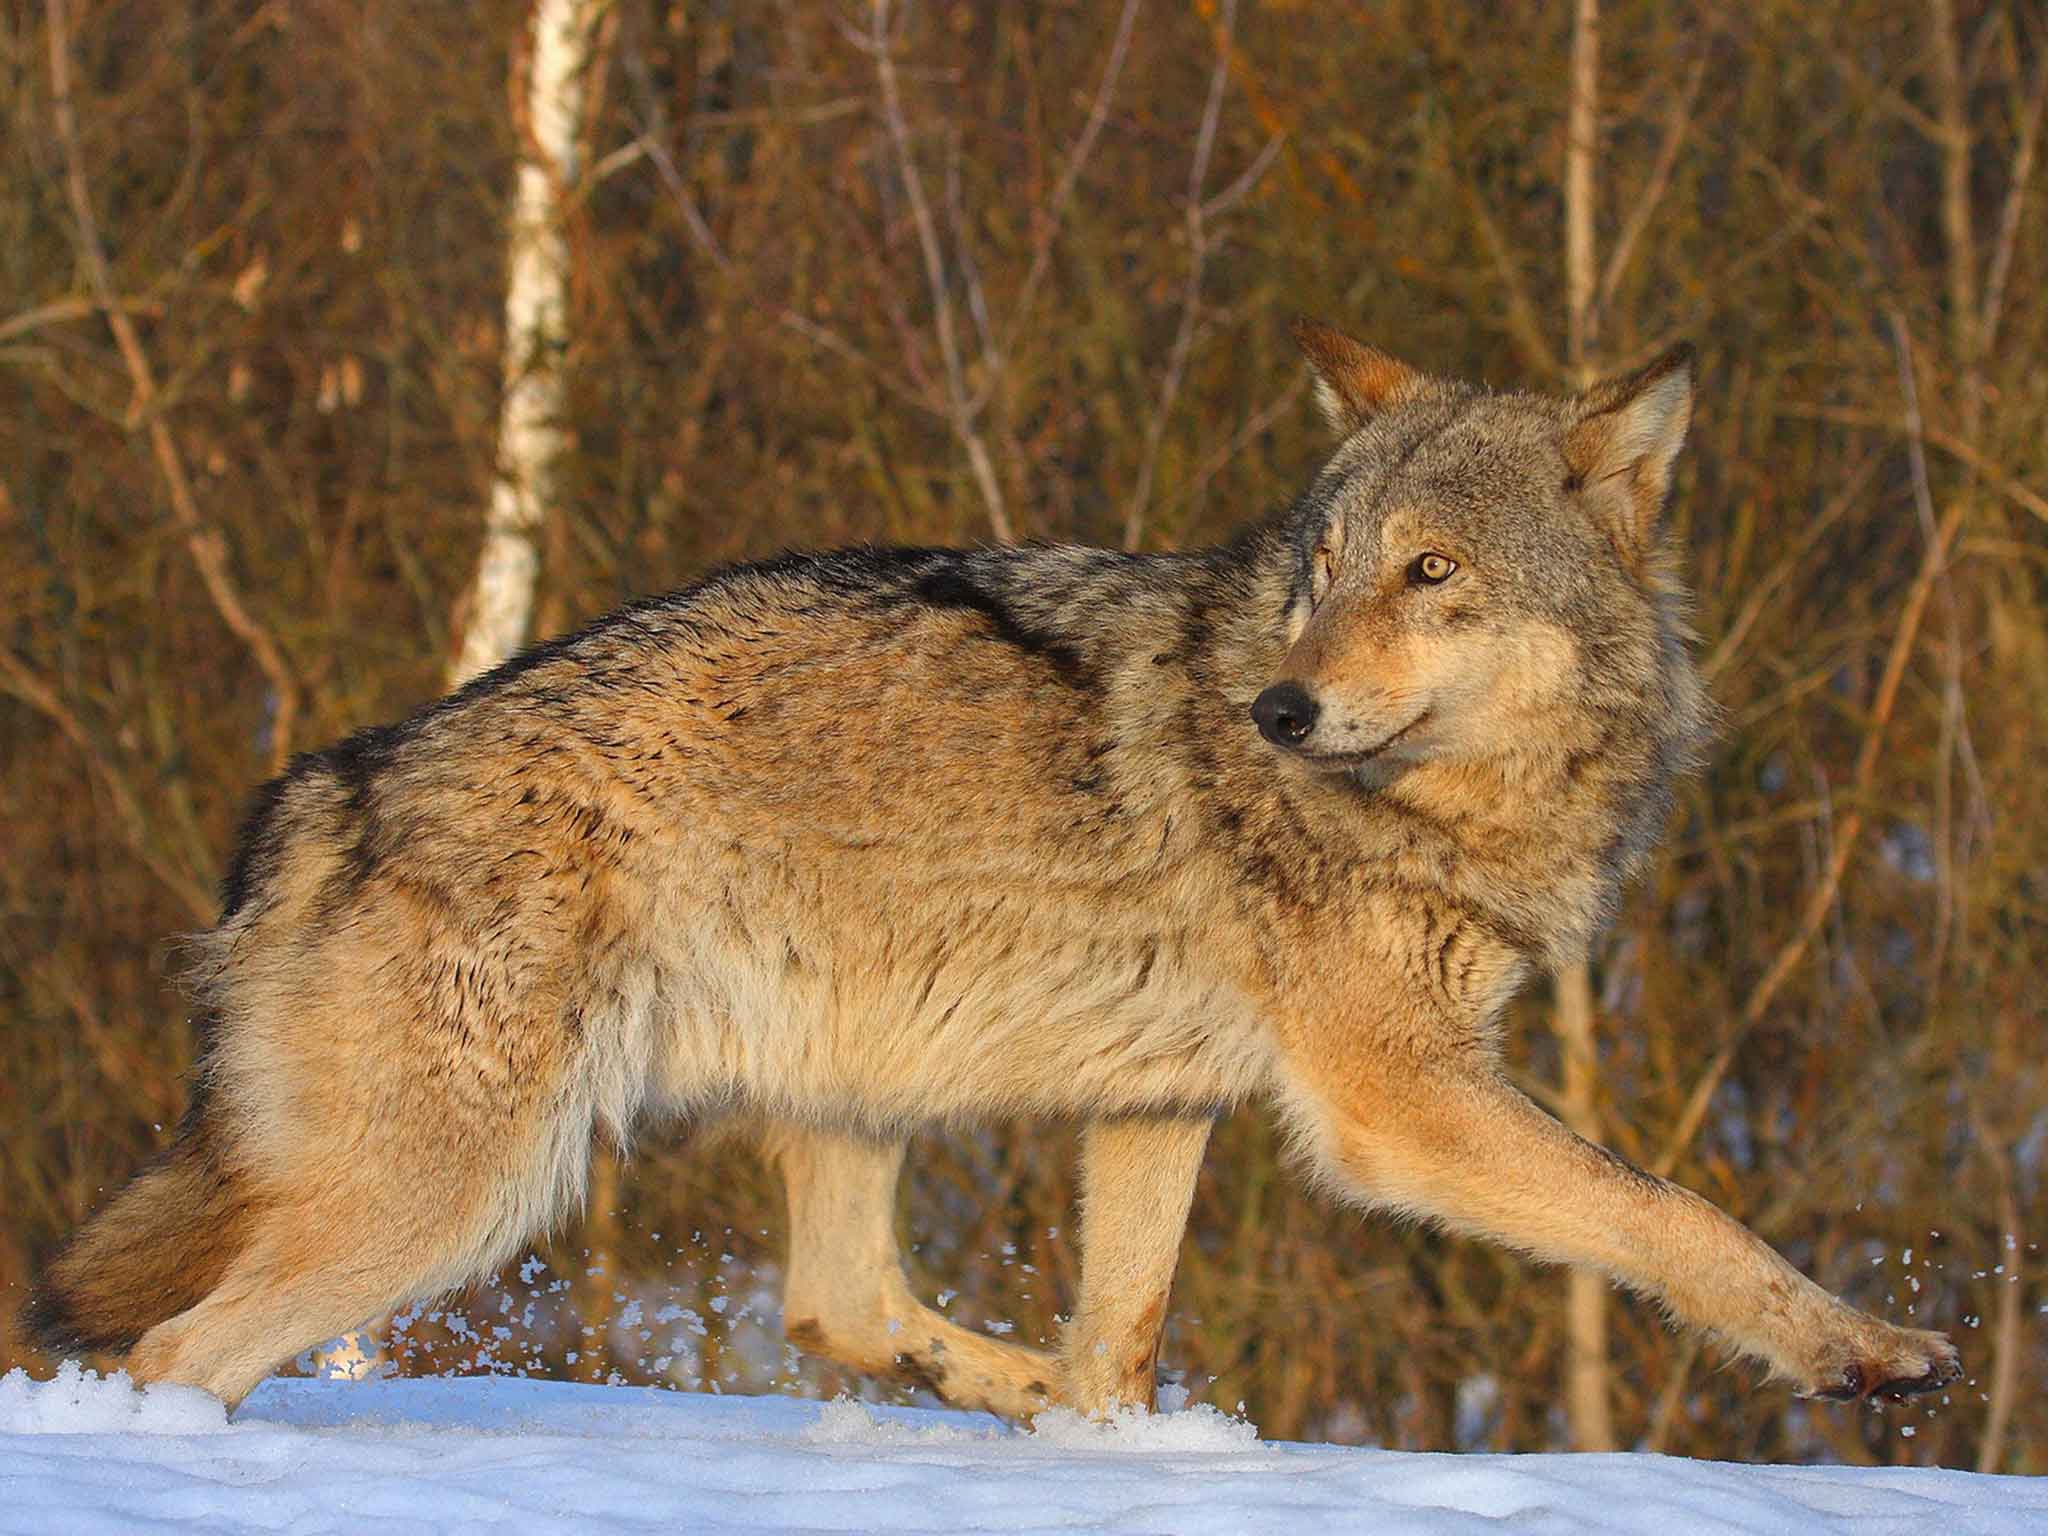 The population of wolves in the exclusion zone was found to be seven times higher than in nature reserves